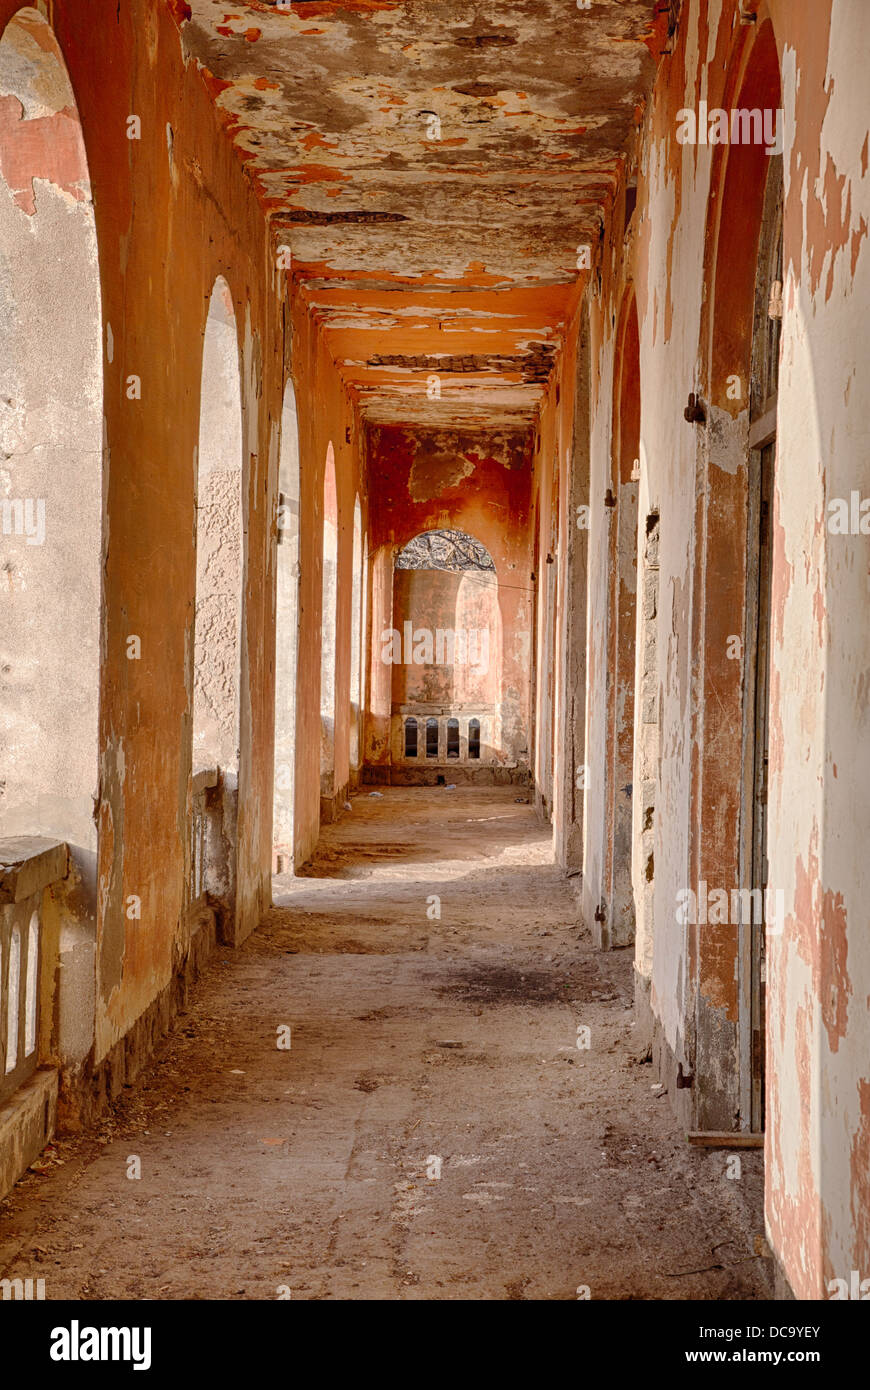 Corridor Along the Offices of the Former French Colonial Governor's Headquarters, Goree Island, Senegal. Stock Photo